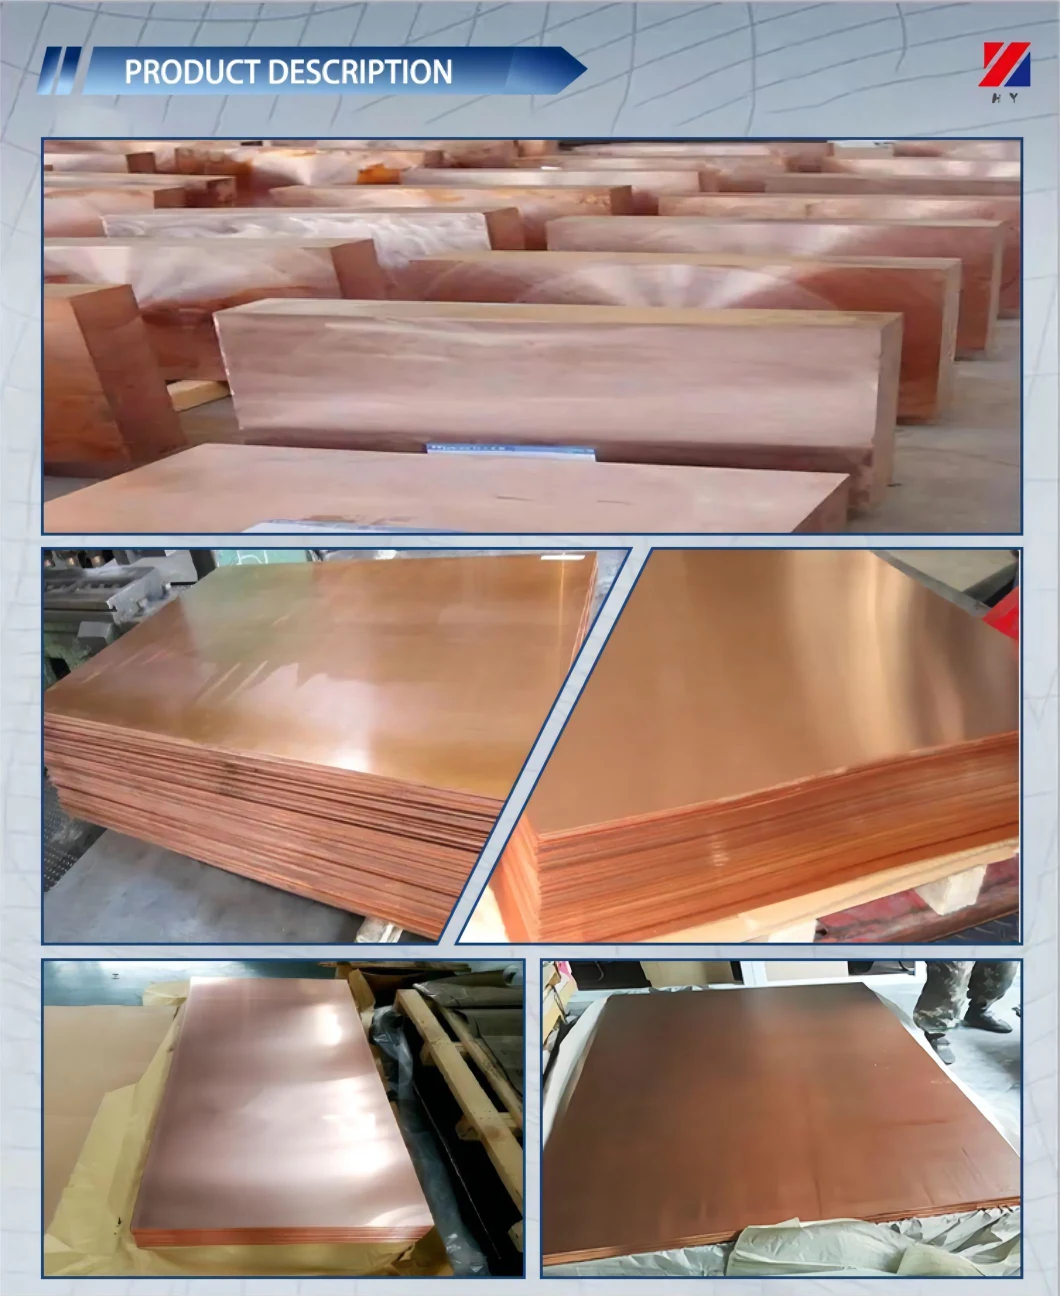 ASTM AISI DIN JIS ISO Stainless Steel/Aluminum/Copper/Brass/Bronze/Carbon Steel/Monel/Inconel/Alloy Steel/Metal/Galvanized Corrugated/Plates Sheet Plate Sheet